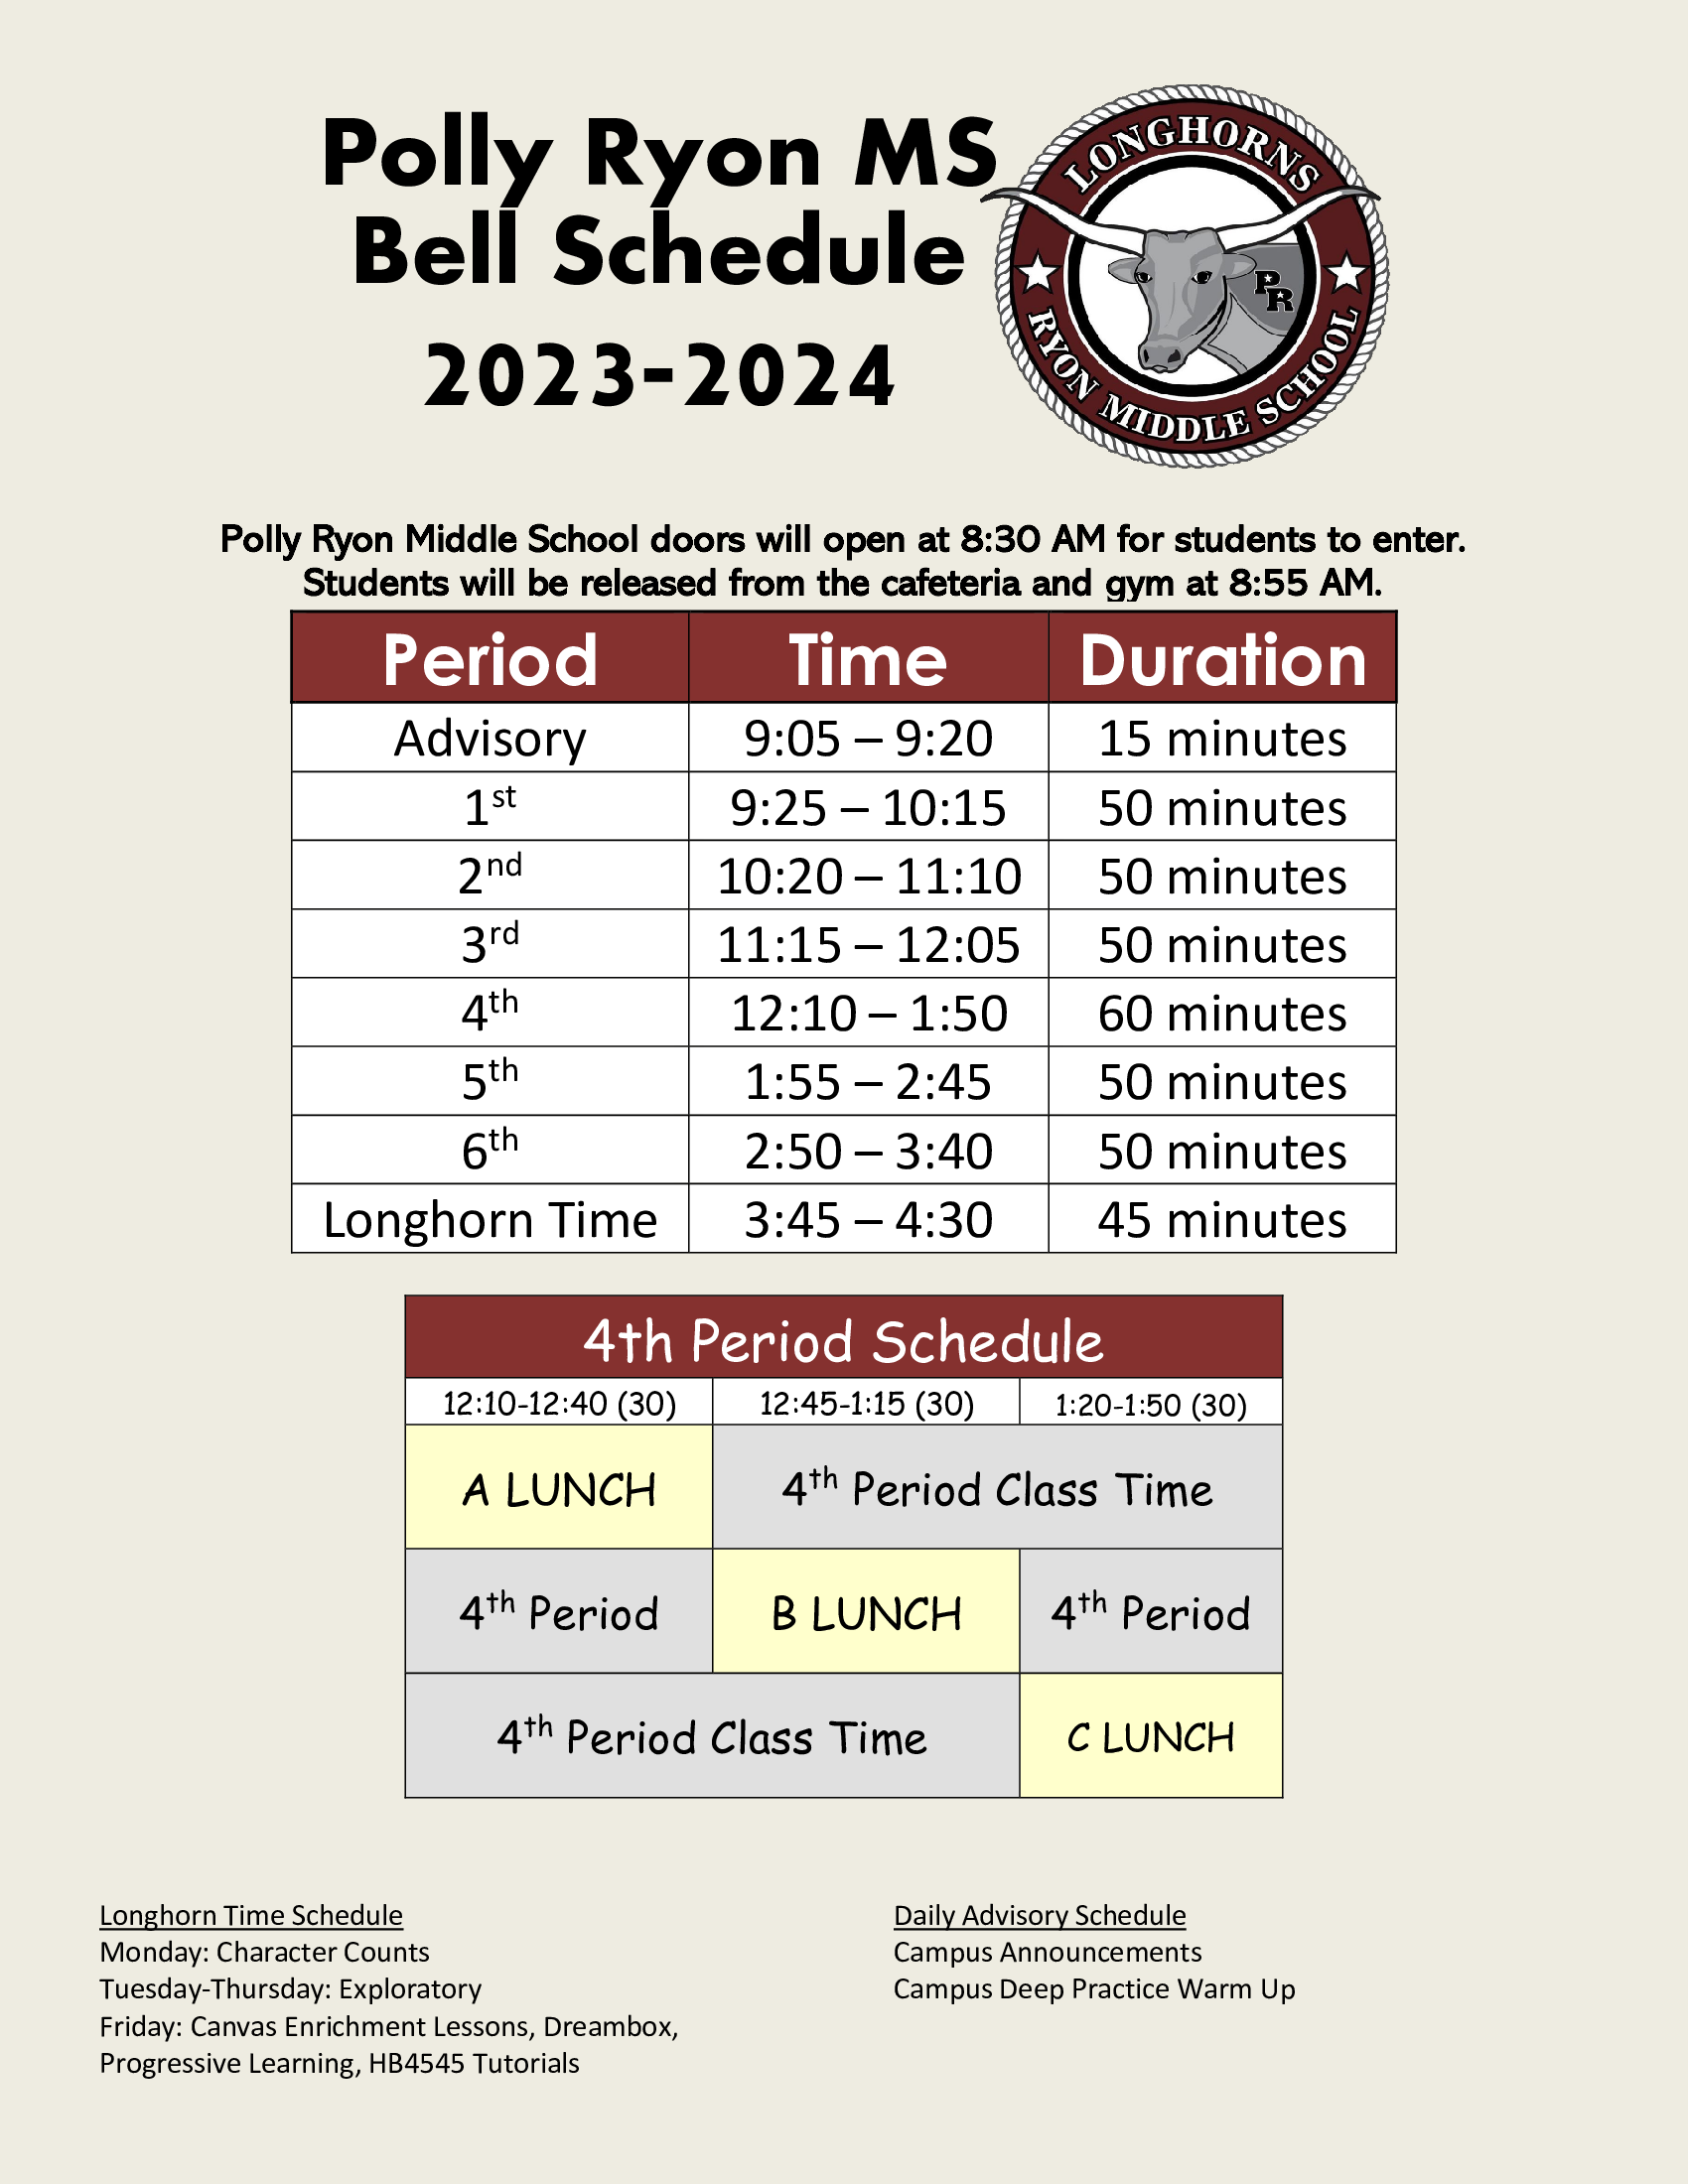 PRMS Bell Schedule_23-24 aligned to RJH and GRHS 1 of 1